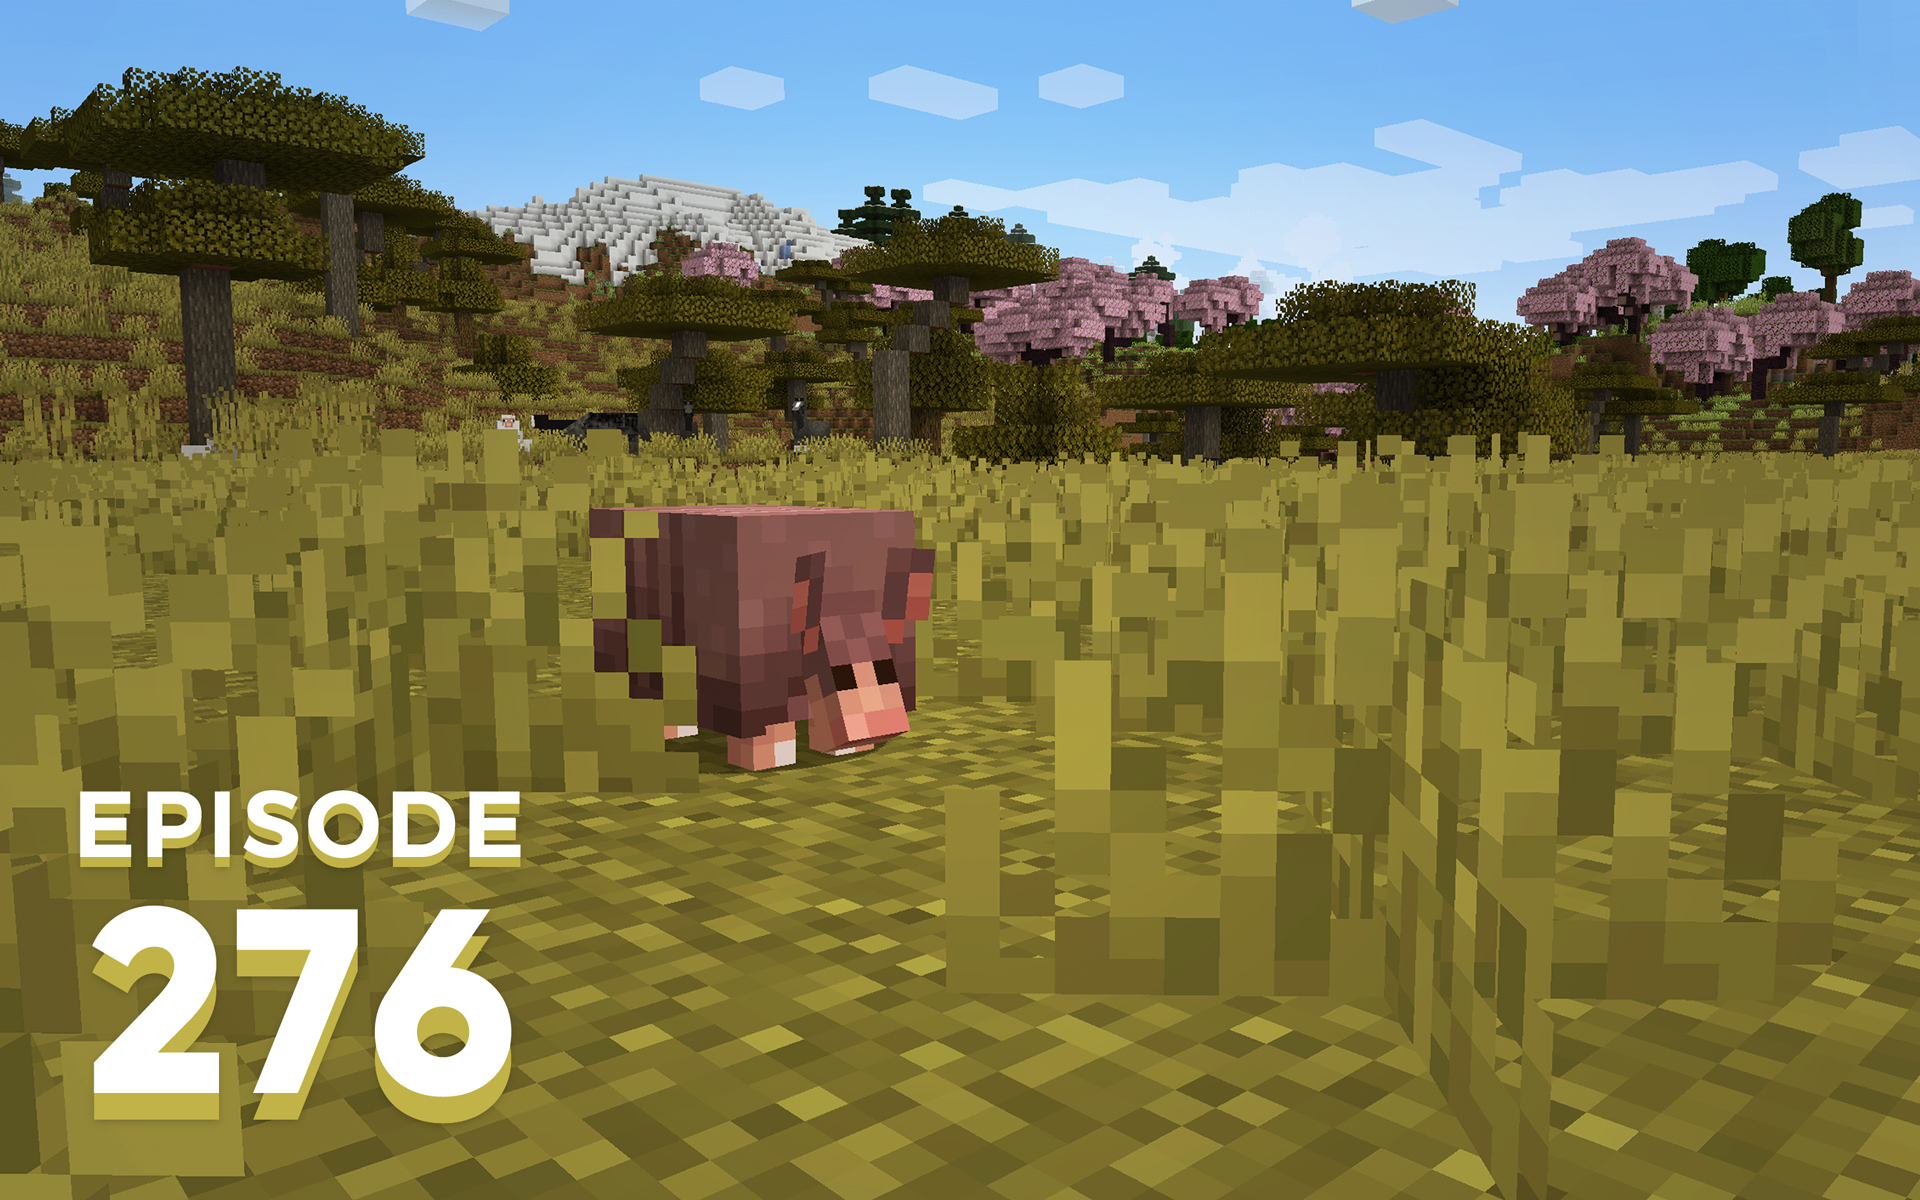 The Spawn Chunks 276: Armadillos And Ancient Mobs